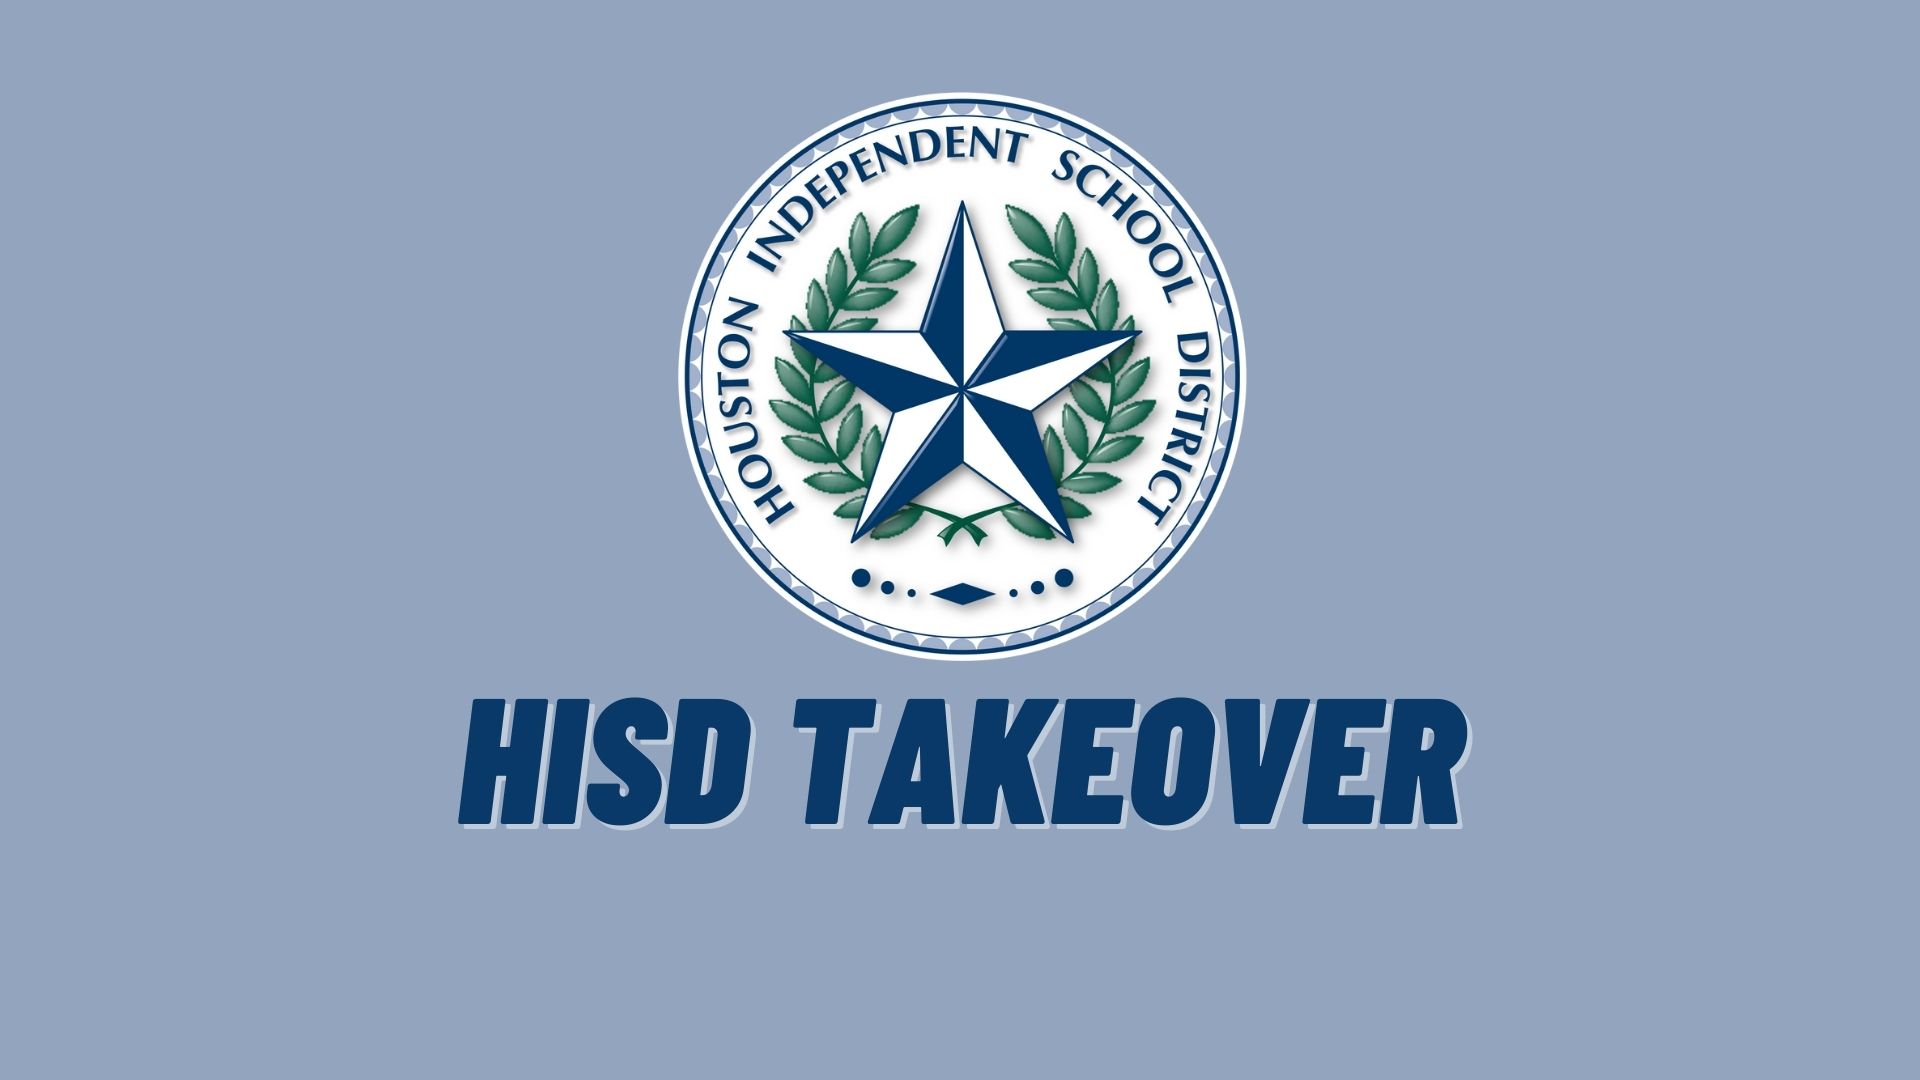 Light blue background with Houston Independent School District logo in the center and the text "HISD TAKEOVER" underneath.